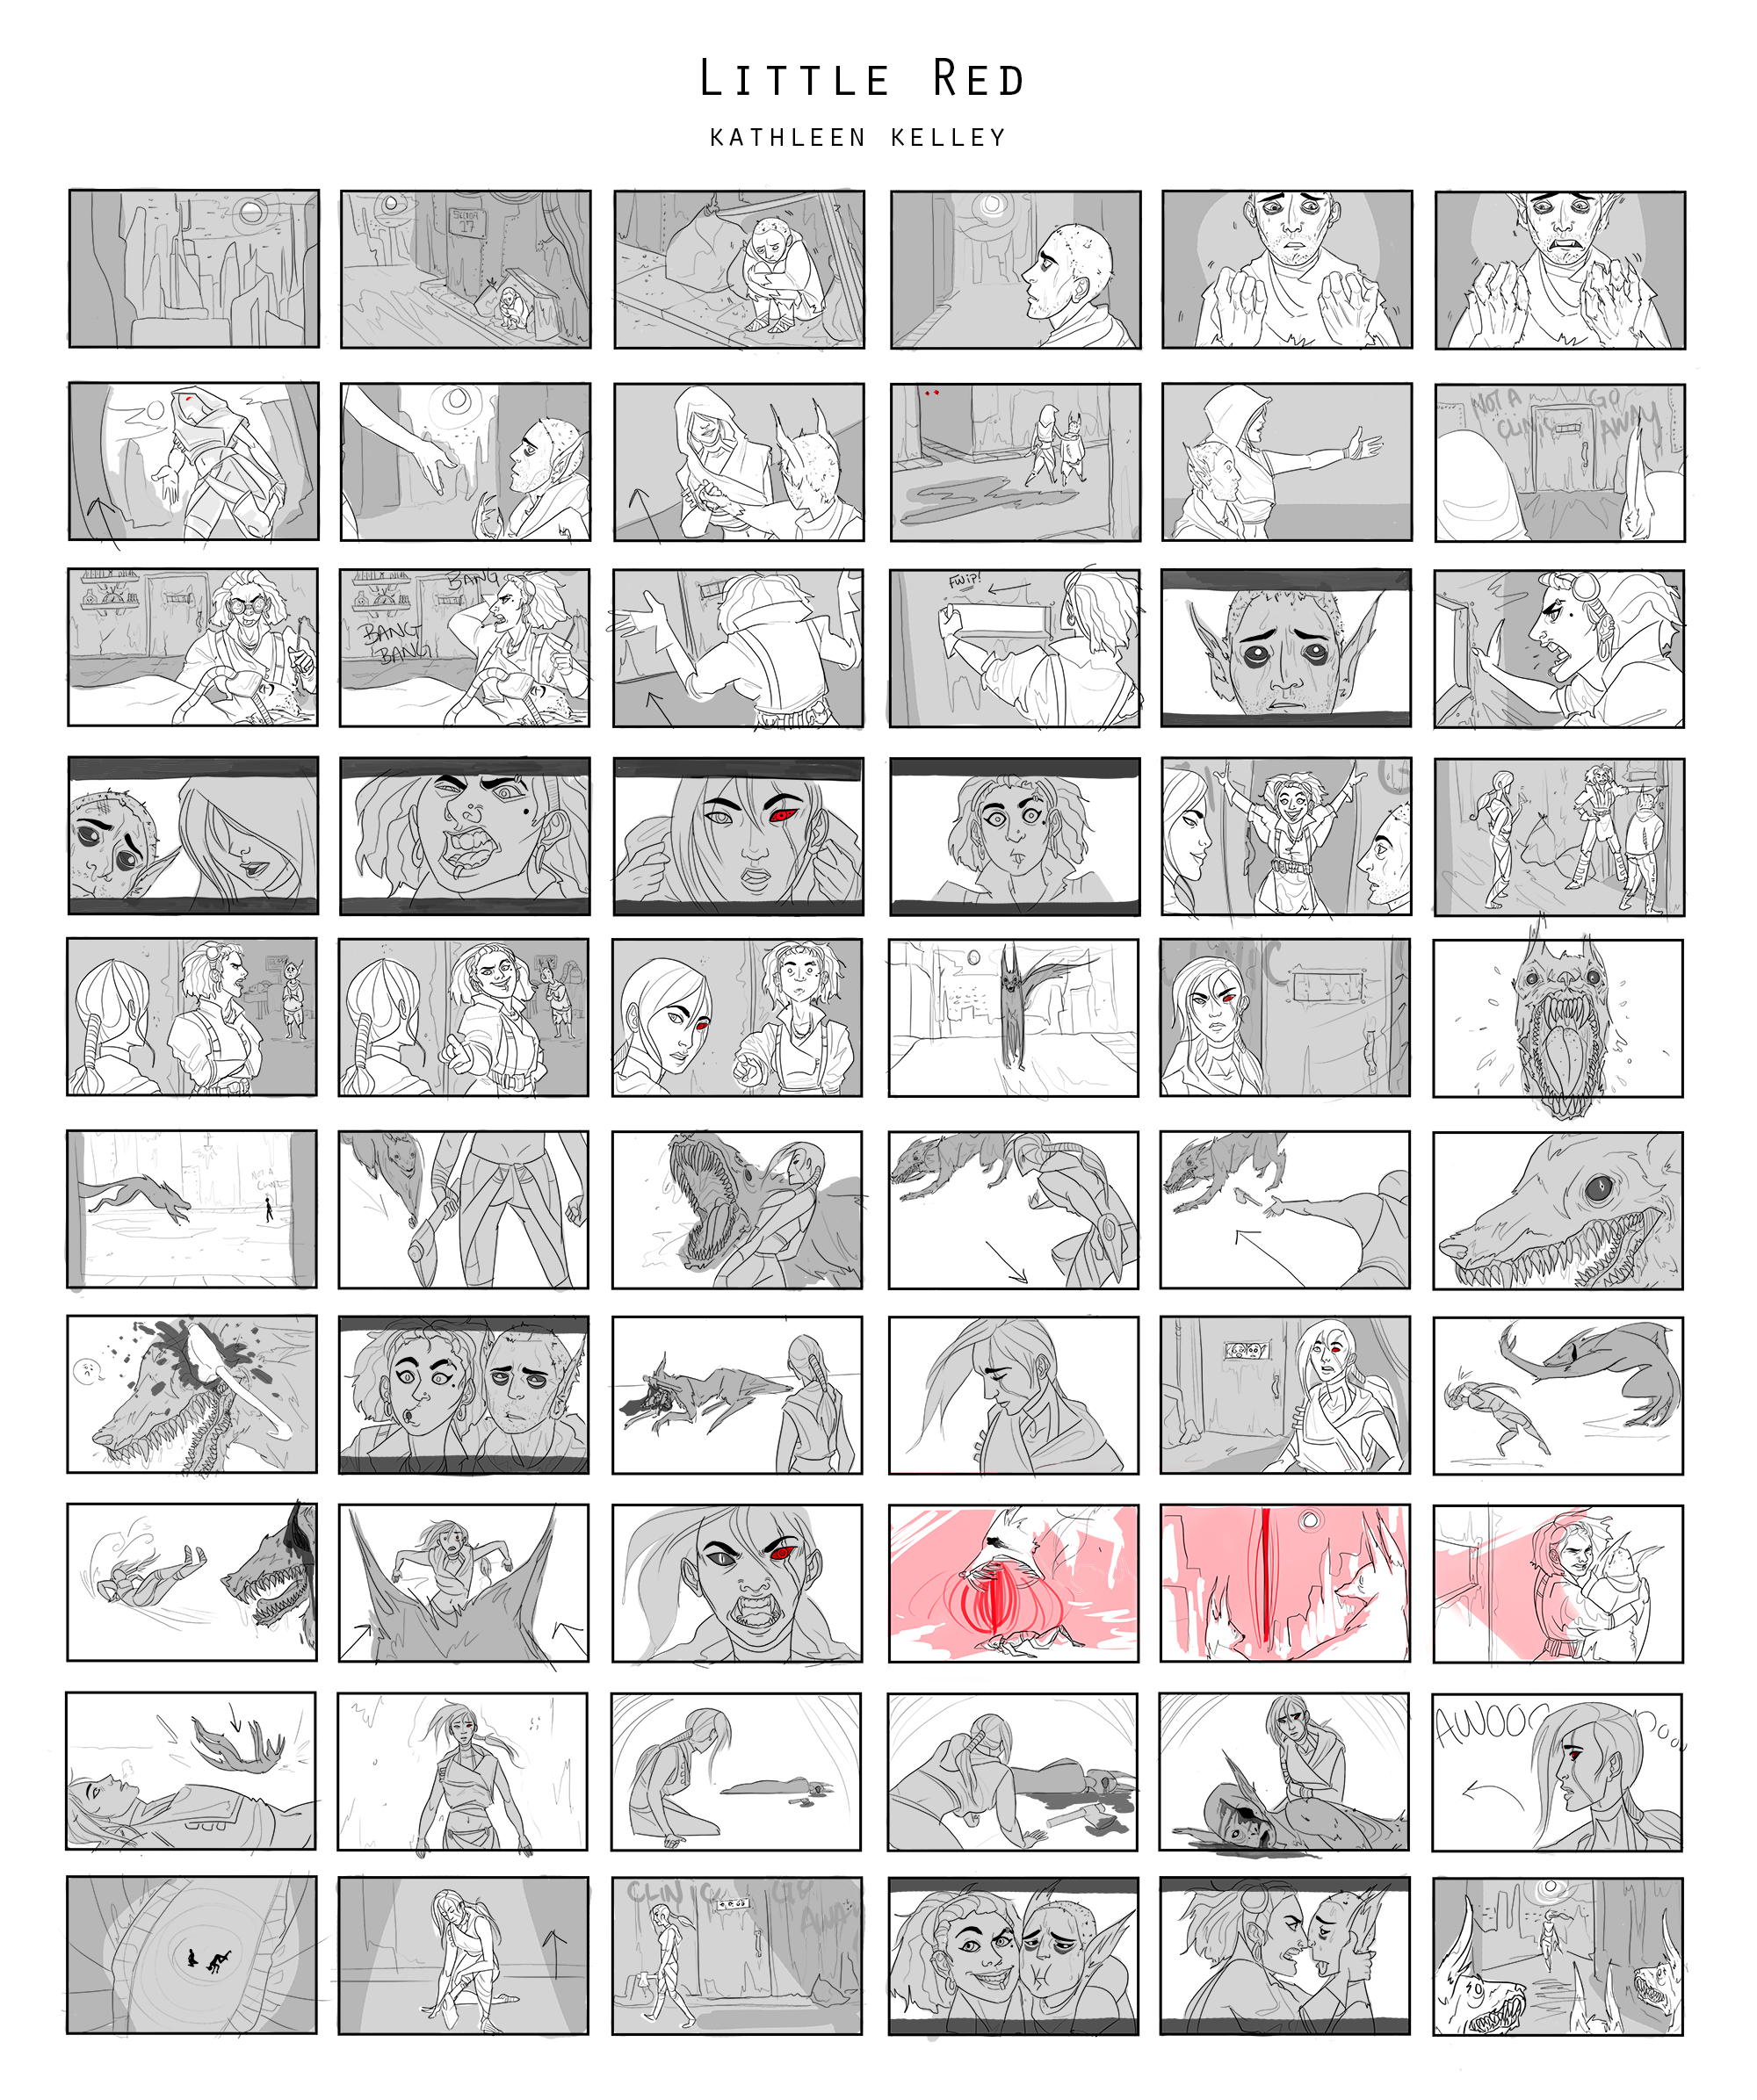 red riding hood inspired storyboard – the art of kathleen kelley